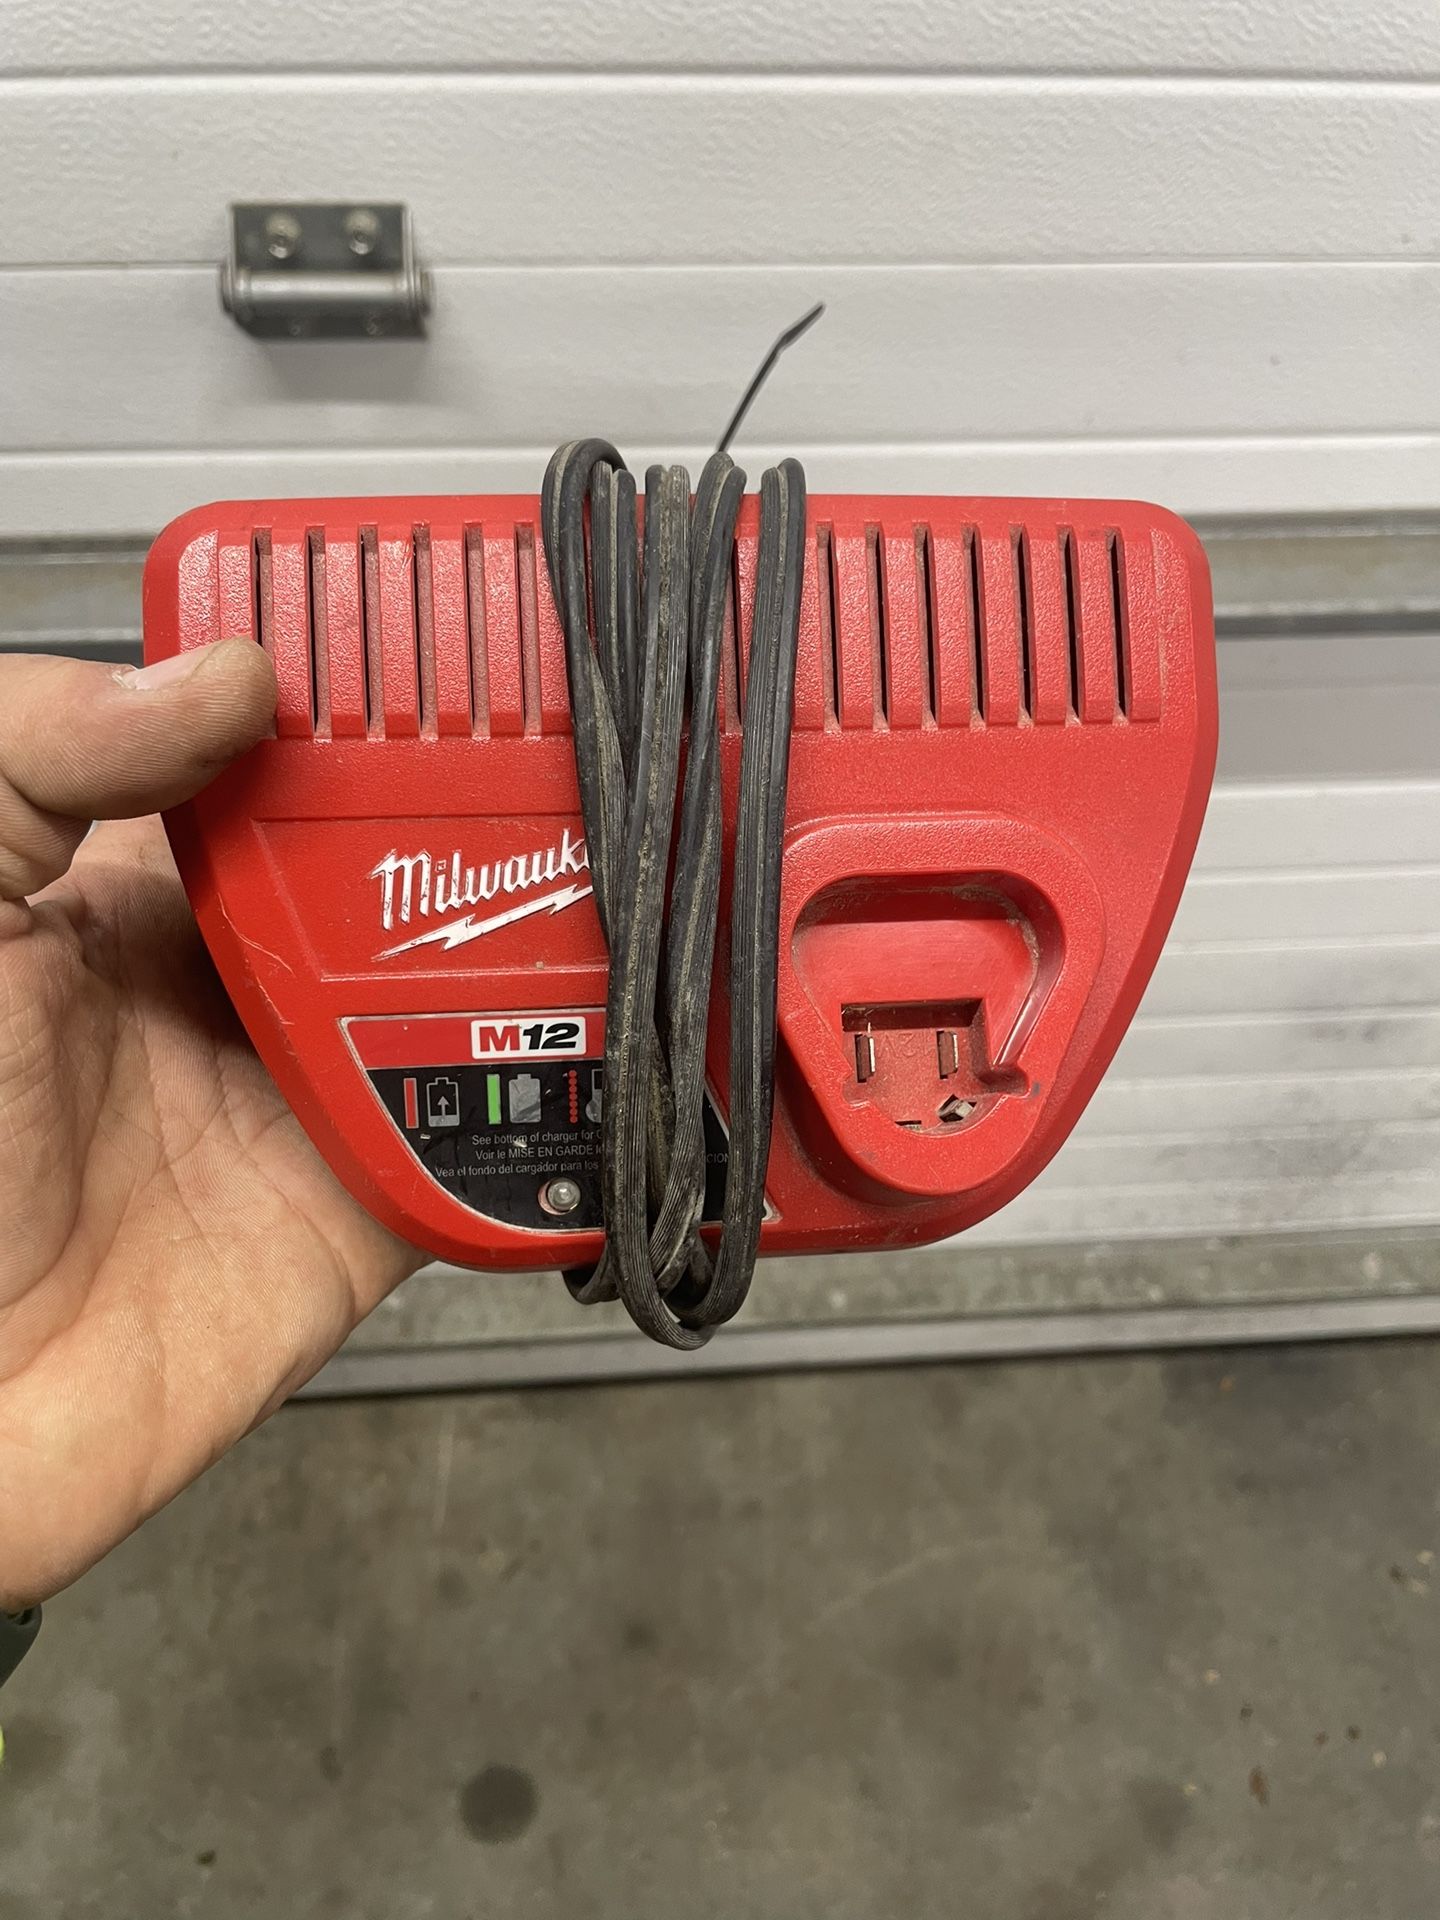 Black & Decker Firestorm 12V Drill With Battery & Charger (READ  DESCRIPTION) for Sale in Newtown, CT - OfferUp